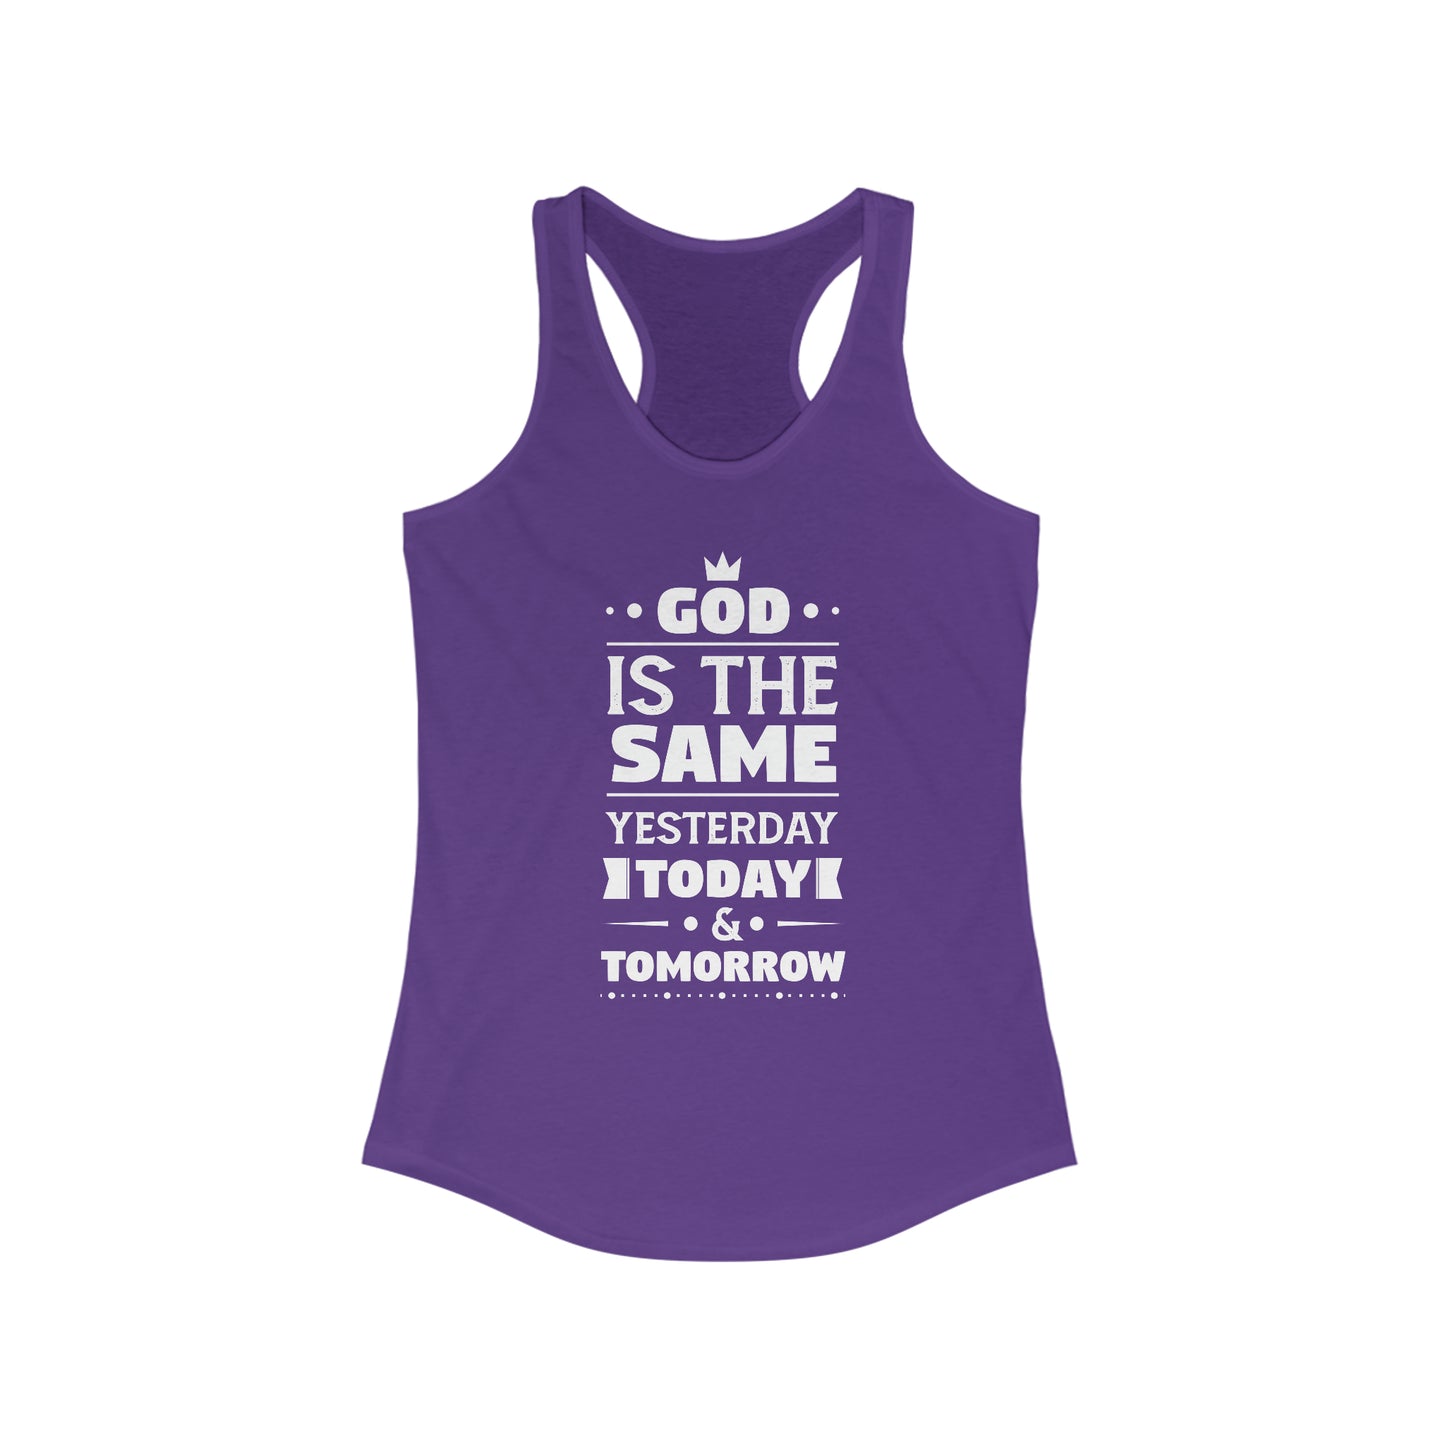 God Is The Same Yesterday Today & Tomorrow Slim Fit Tank-top